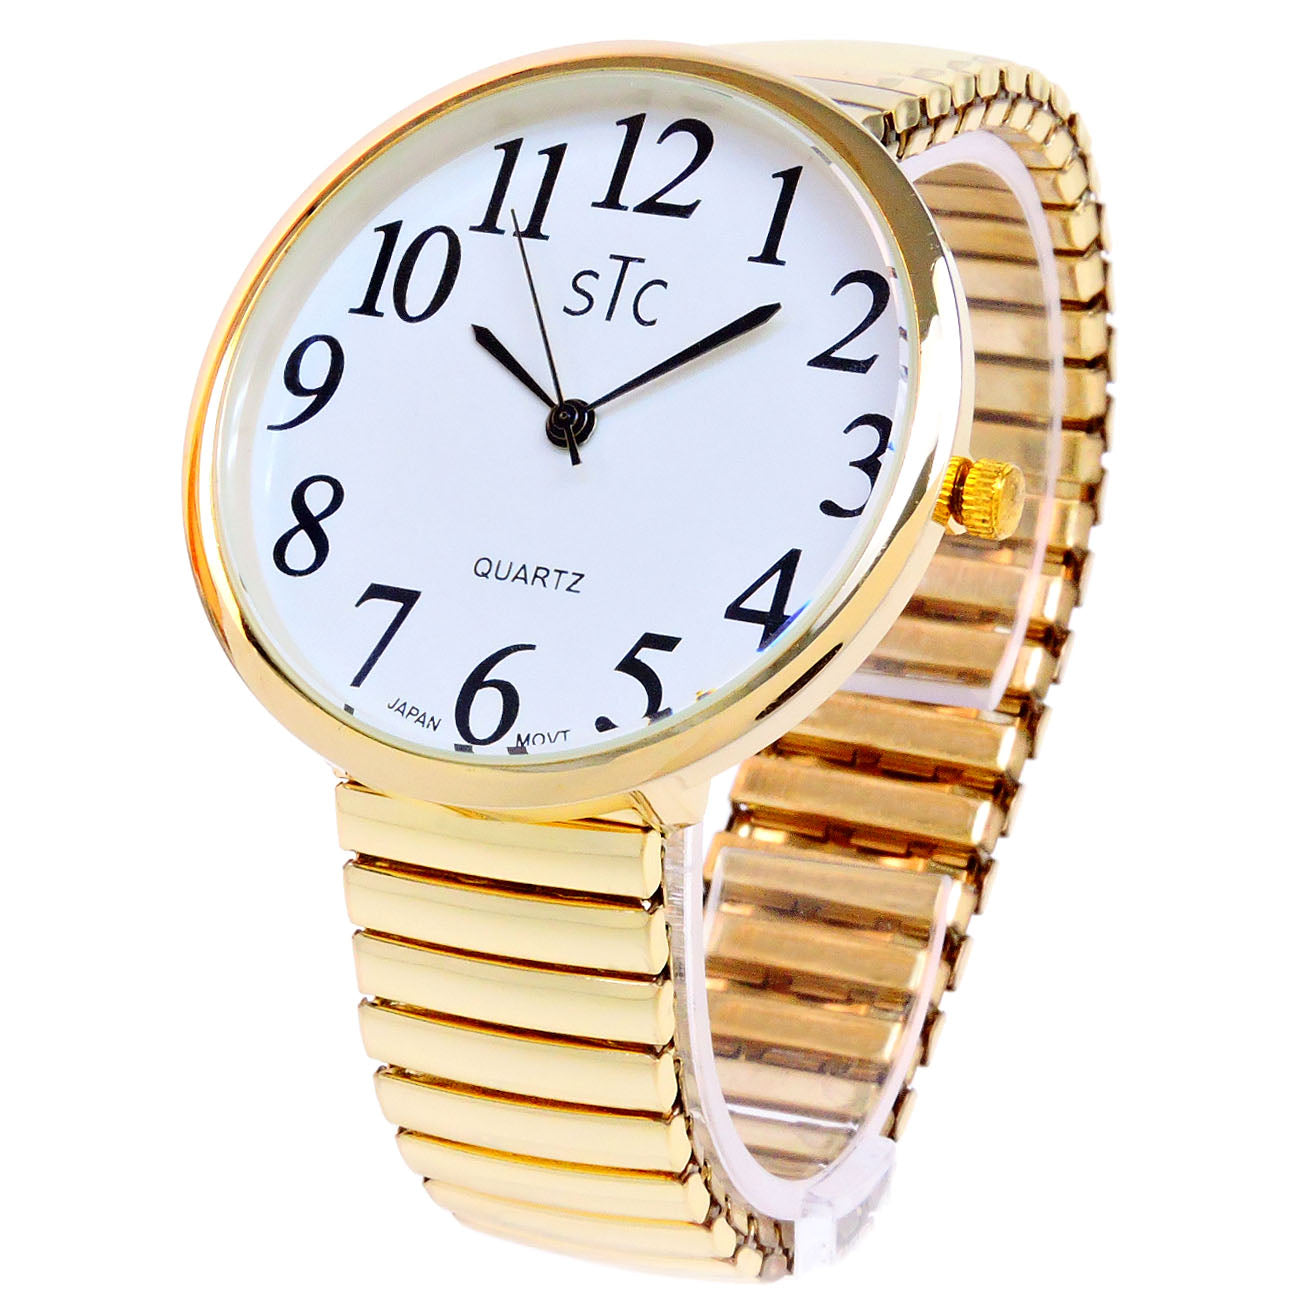 STC Gold Super Large Face Easy to Read Stretch Band Watch NIB